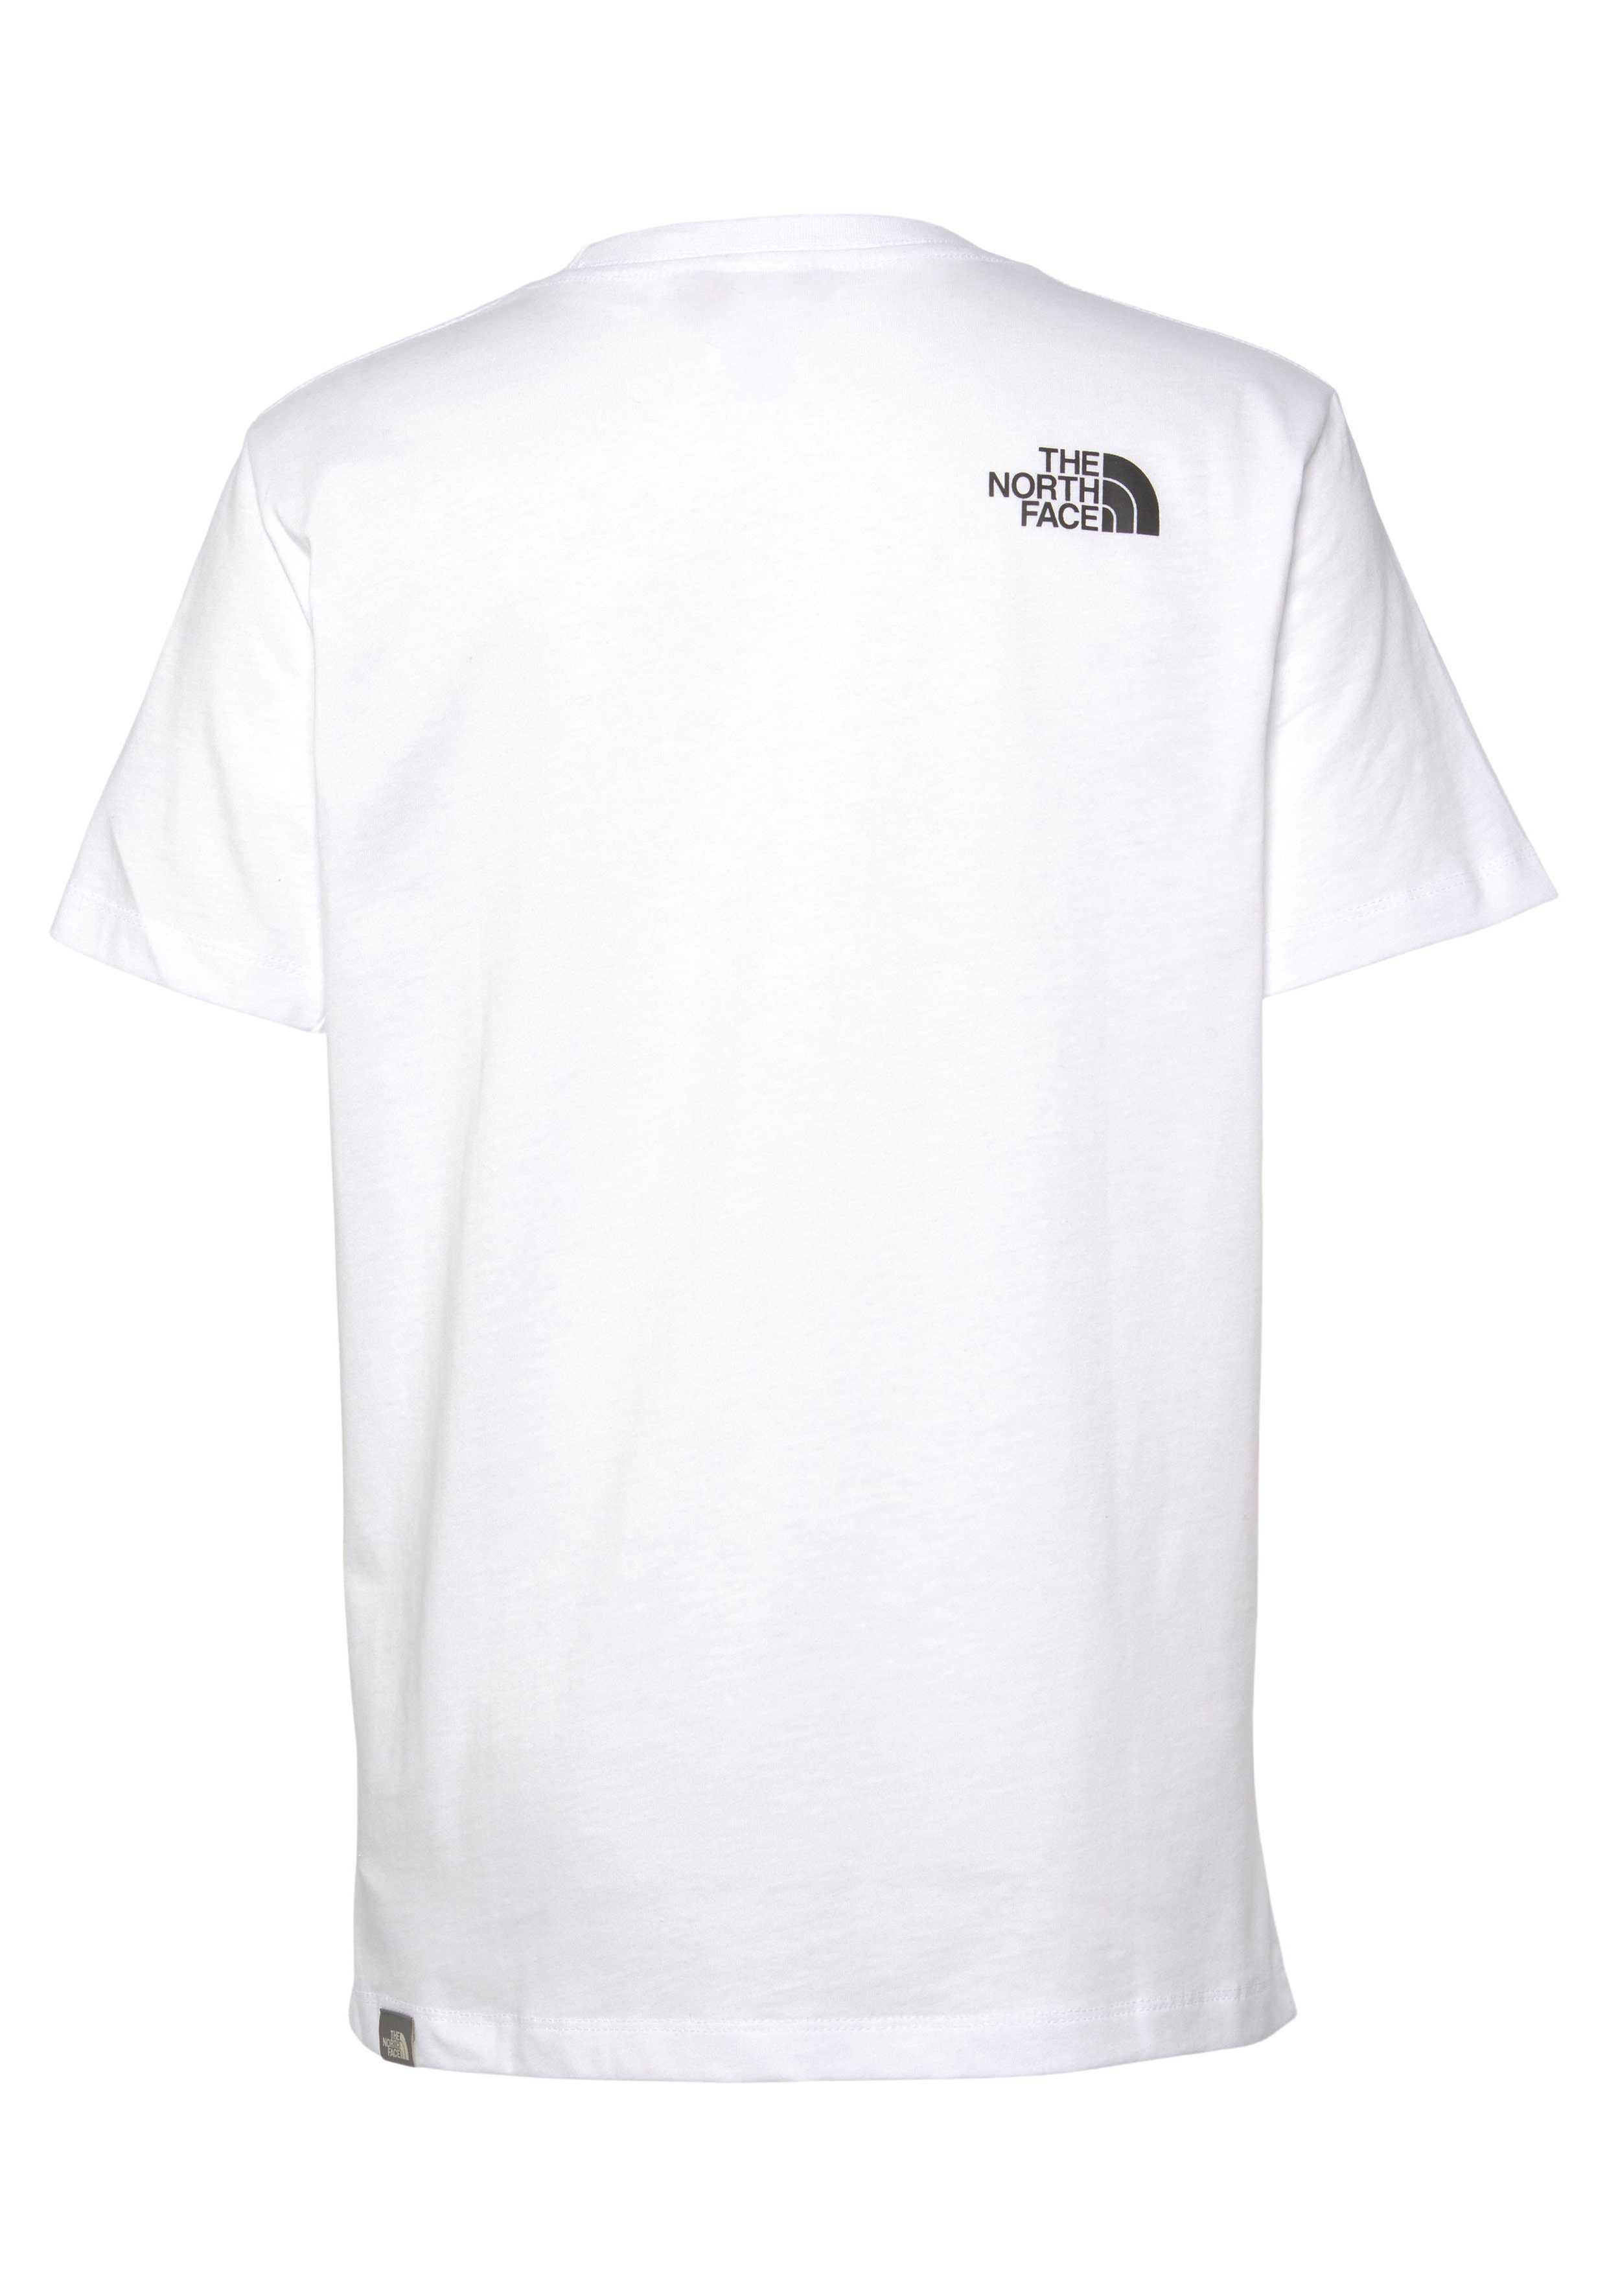 white TEE T-Shirt für - EASY North Kinder The Face